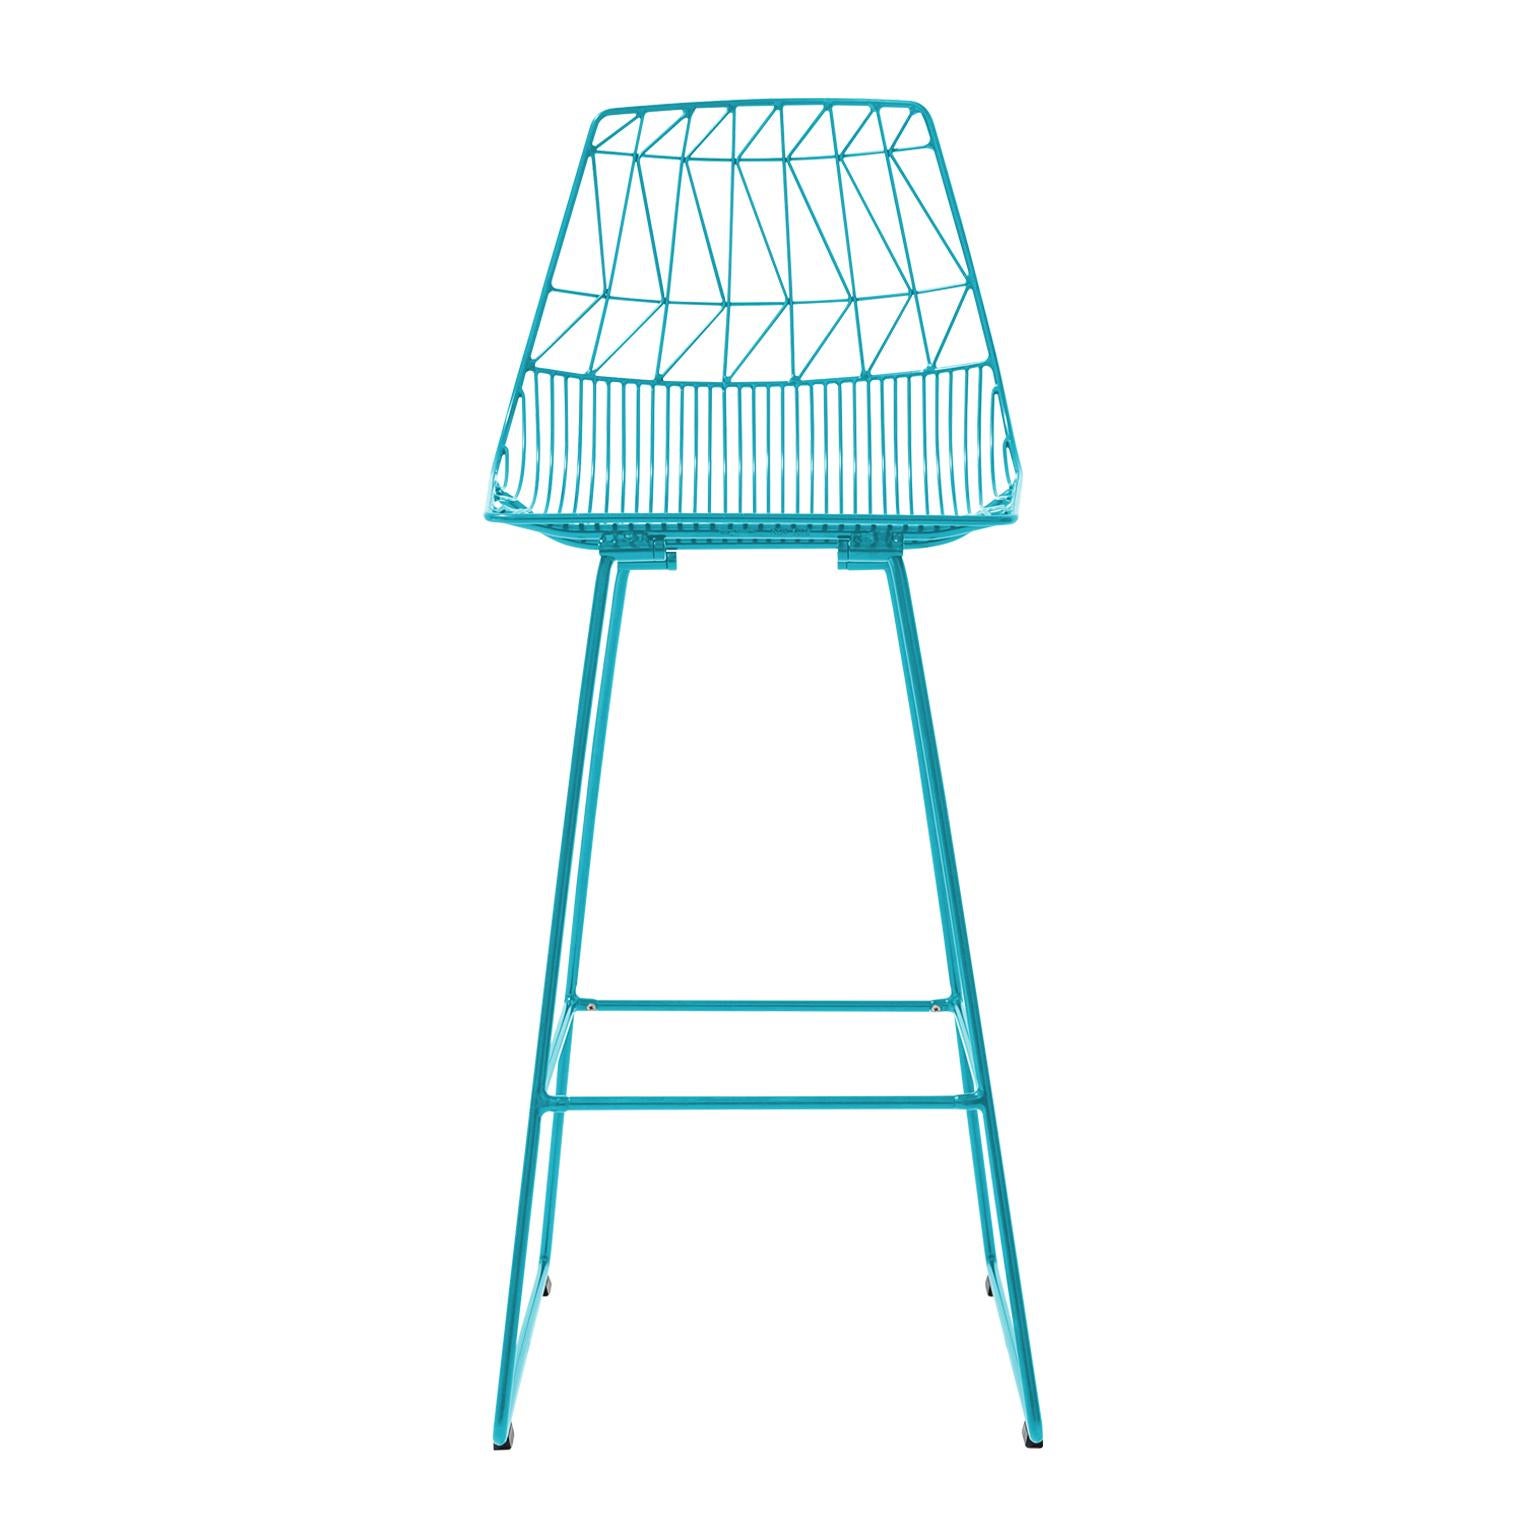 The Lucy bar stool elevates the bar experience. Stunning in a commercial setting or as an accent to a home bar, this Mid-Century Modern inspired wire bar stool is durable and customizable with metallic finishes, stainless steel, or a variety of